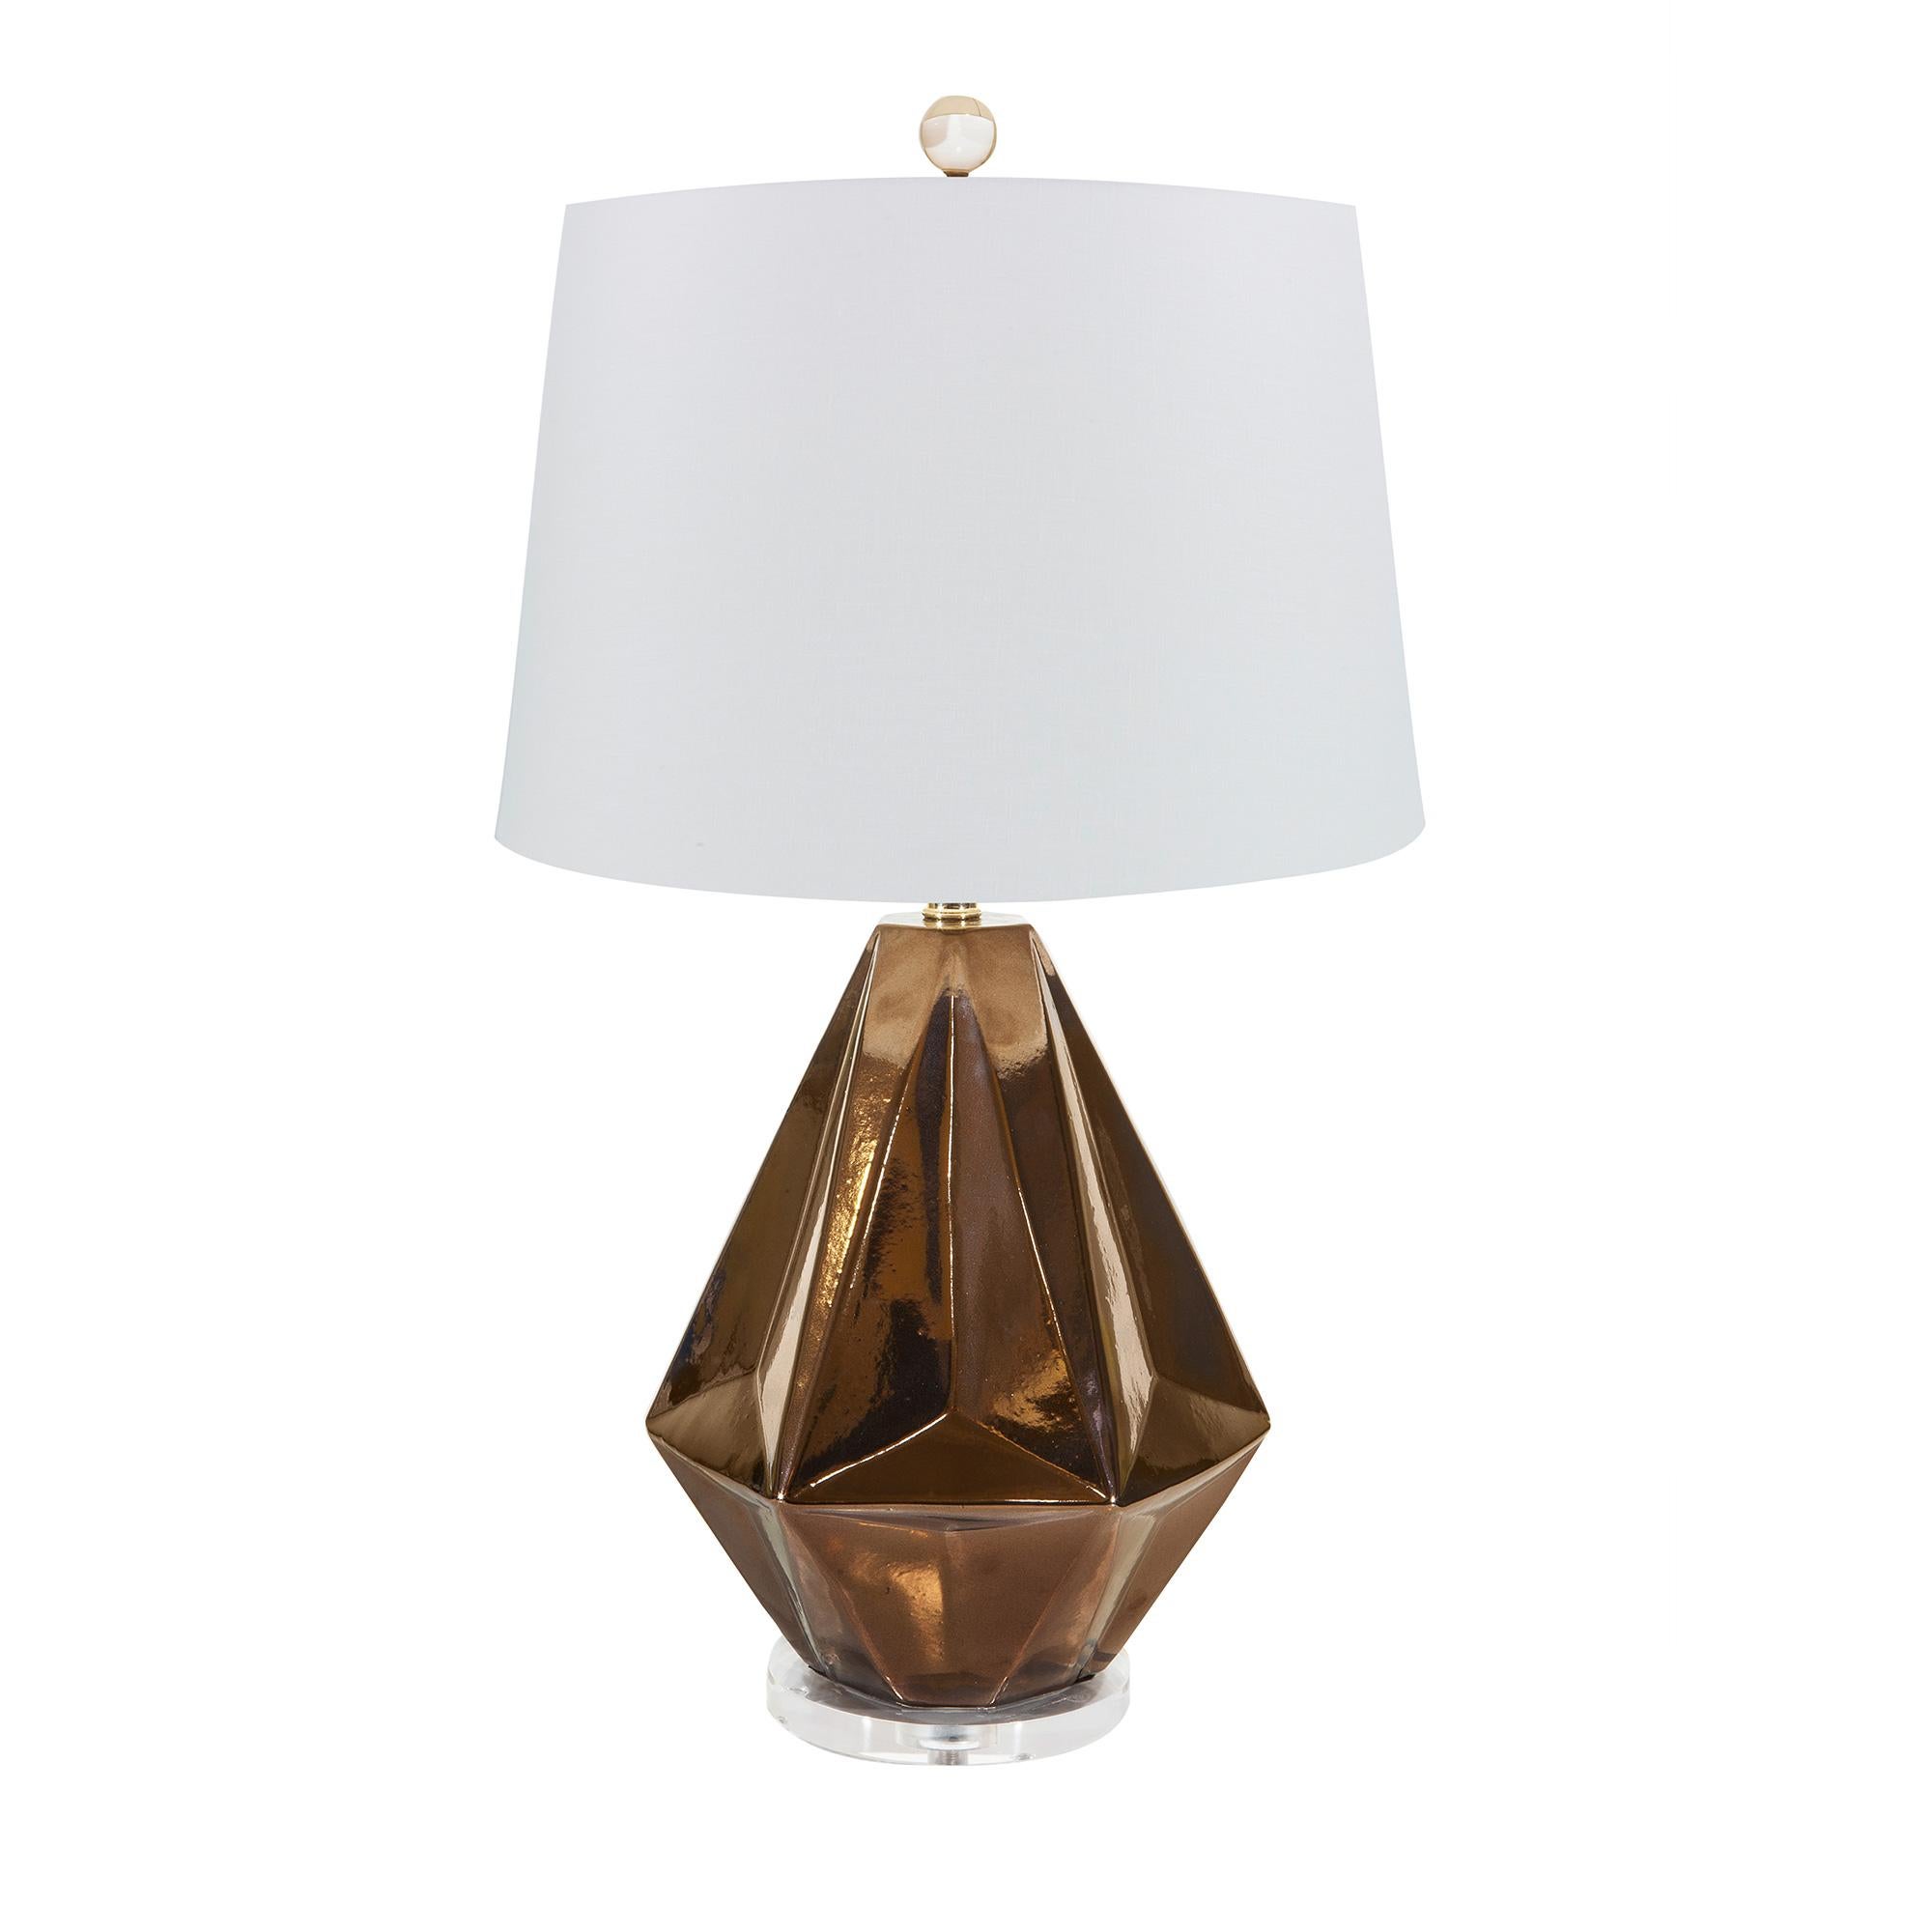 Brown (QR-16105.BRONZE.0) Liza Faceted Ceramic Table Lamp with Ivory Linen Shade by CuratedKravet